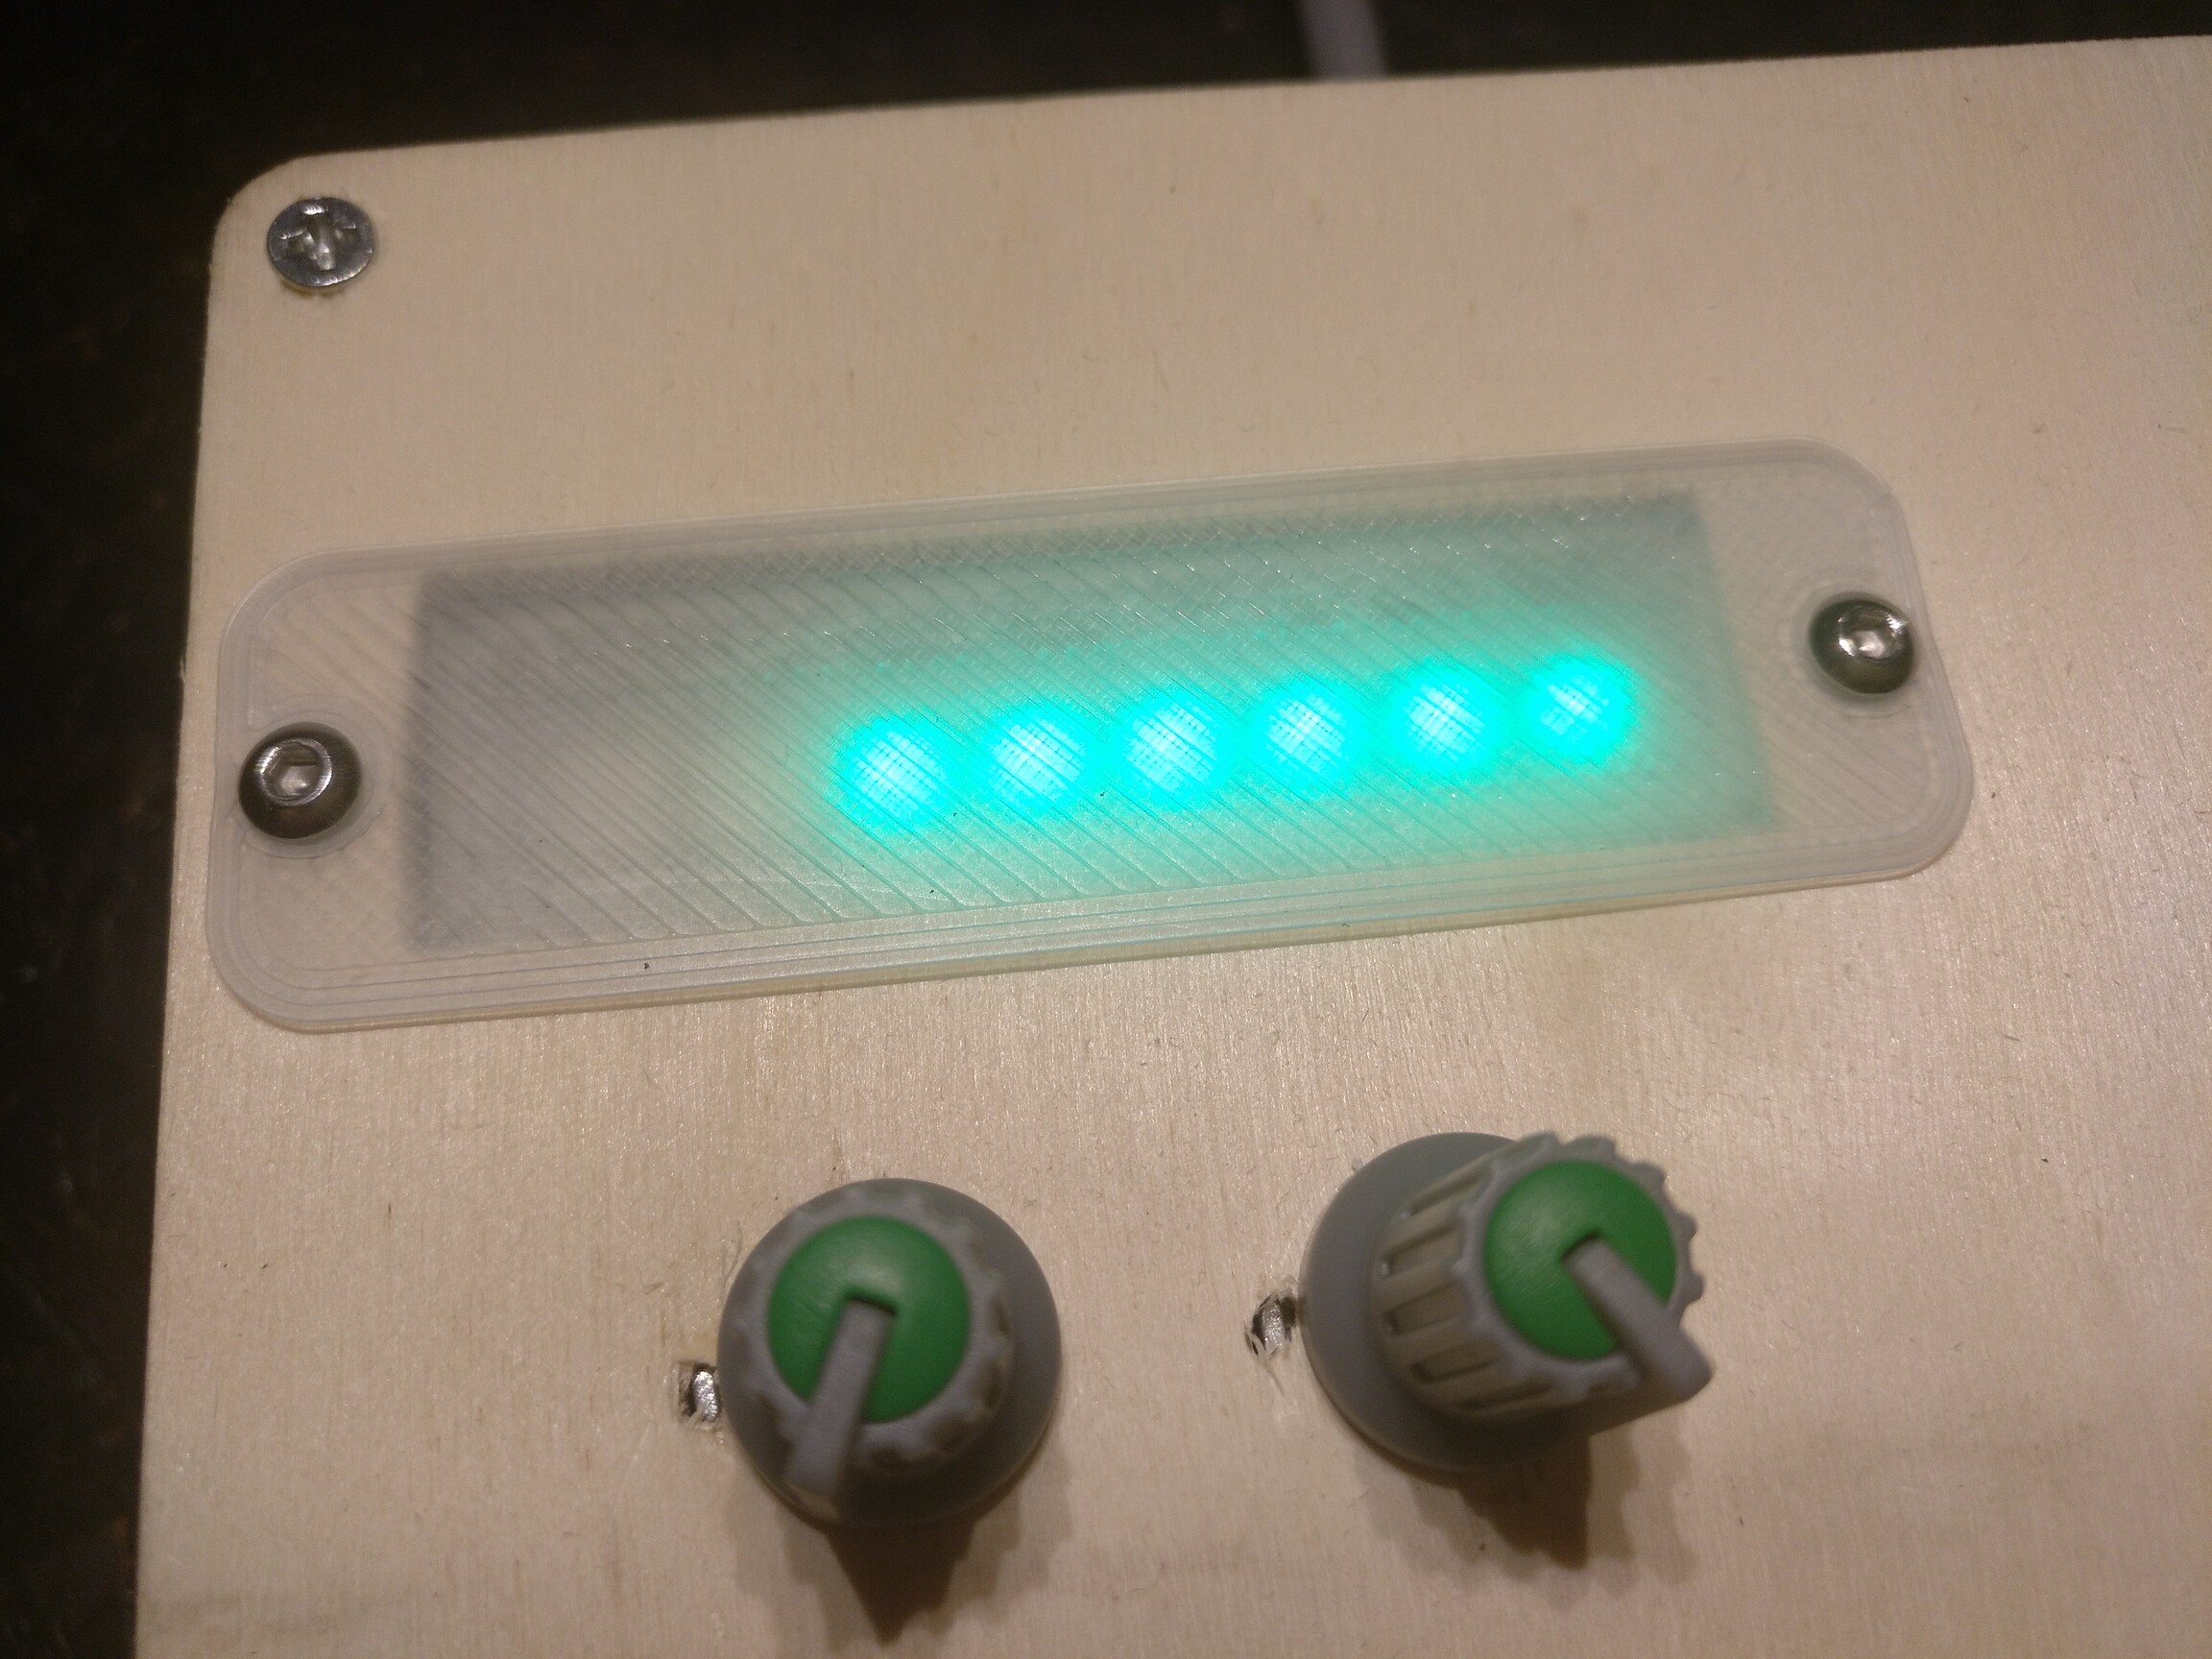 With six LEDs at around 10% intensity of green (it looks better in person)